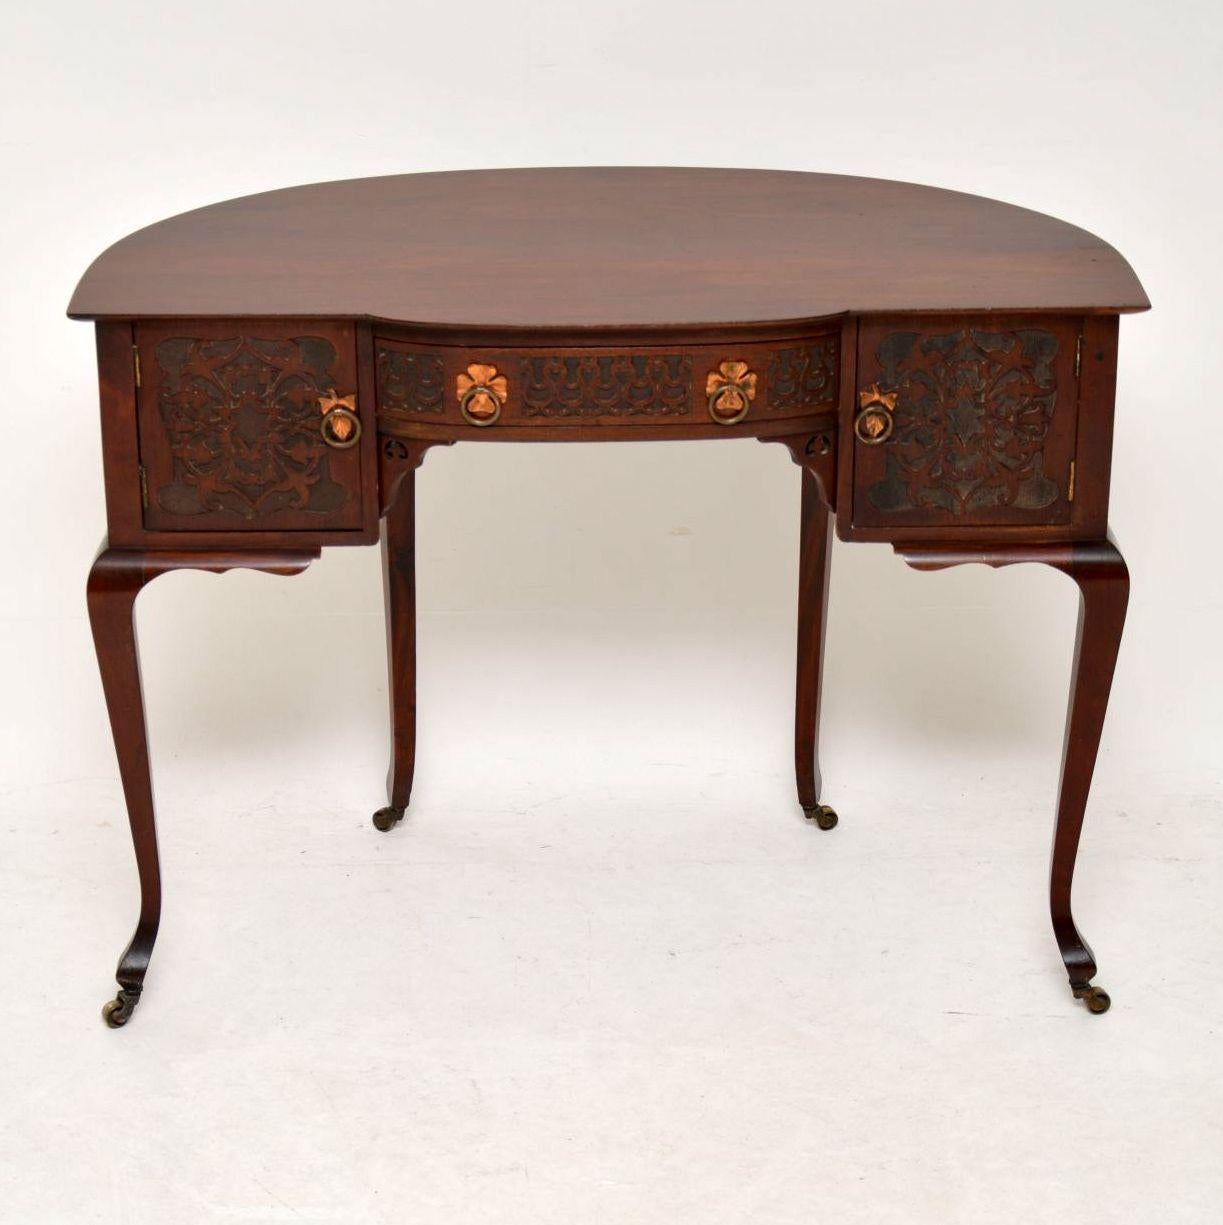 Very unusual antique Art Nouveau solid mahogany desk or dressing table in good original condition, dating from the 1890s period. It’s a freestanding piece of furniture, so looks good from back or front. It has a curved back, with two cupboards and